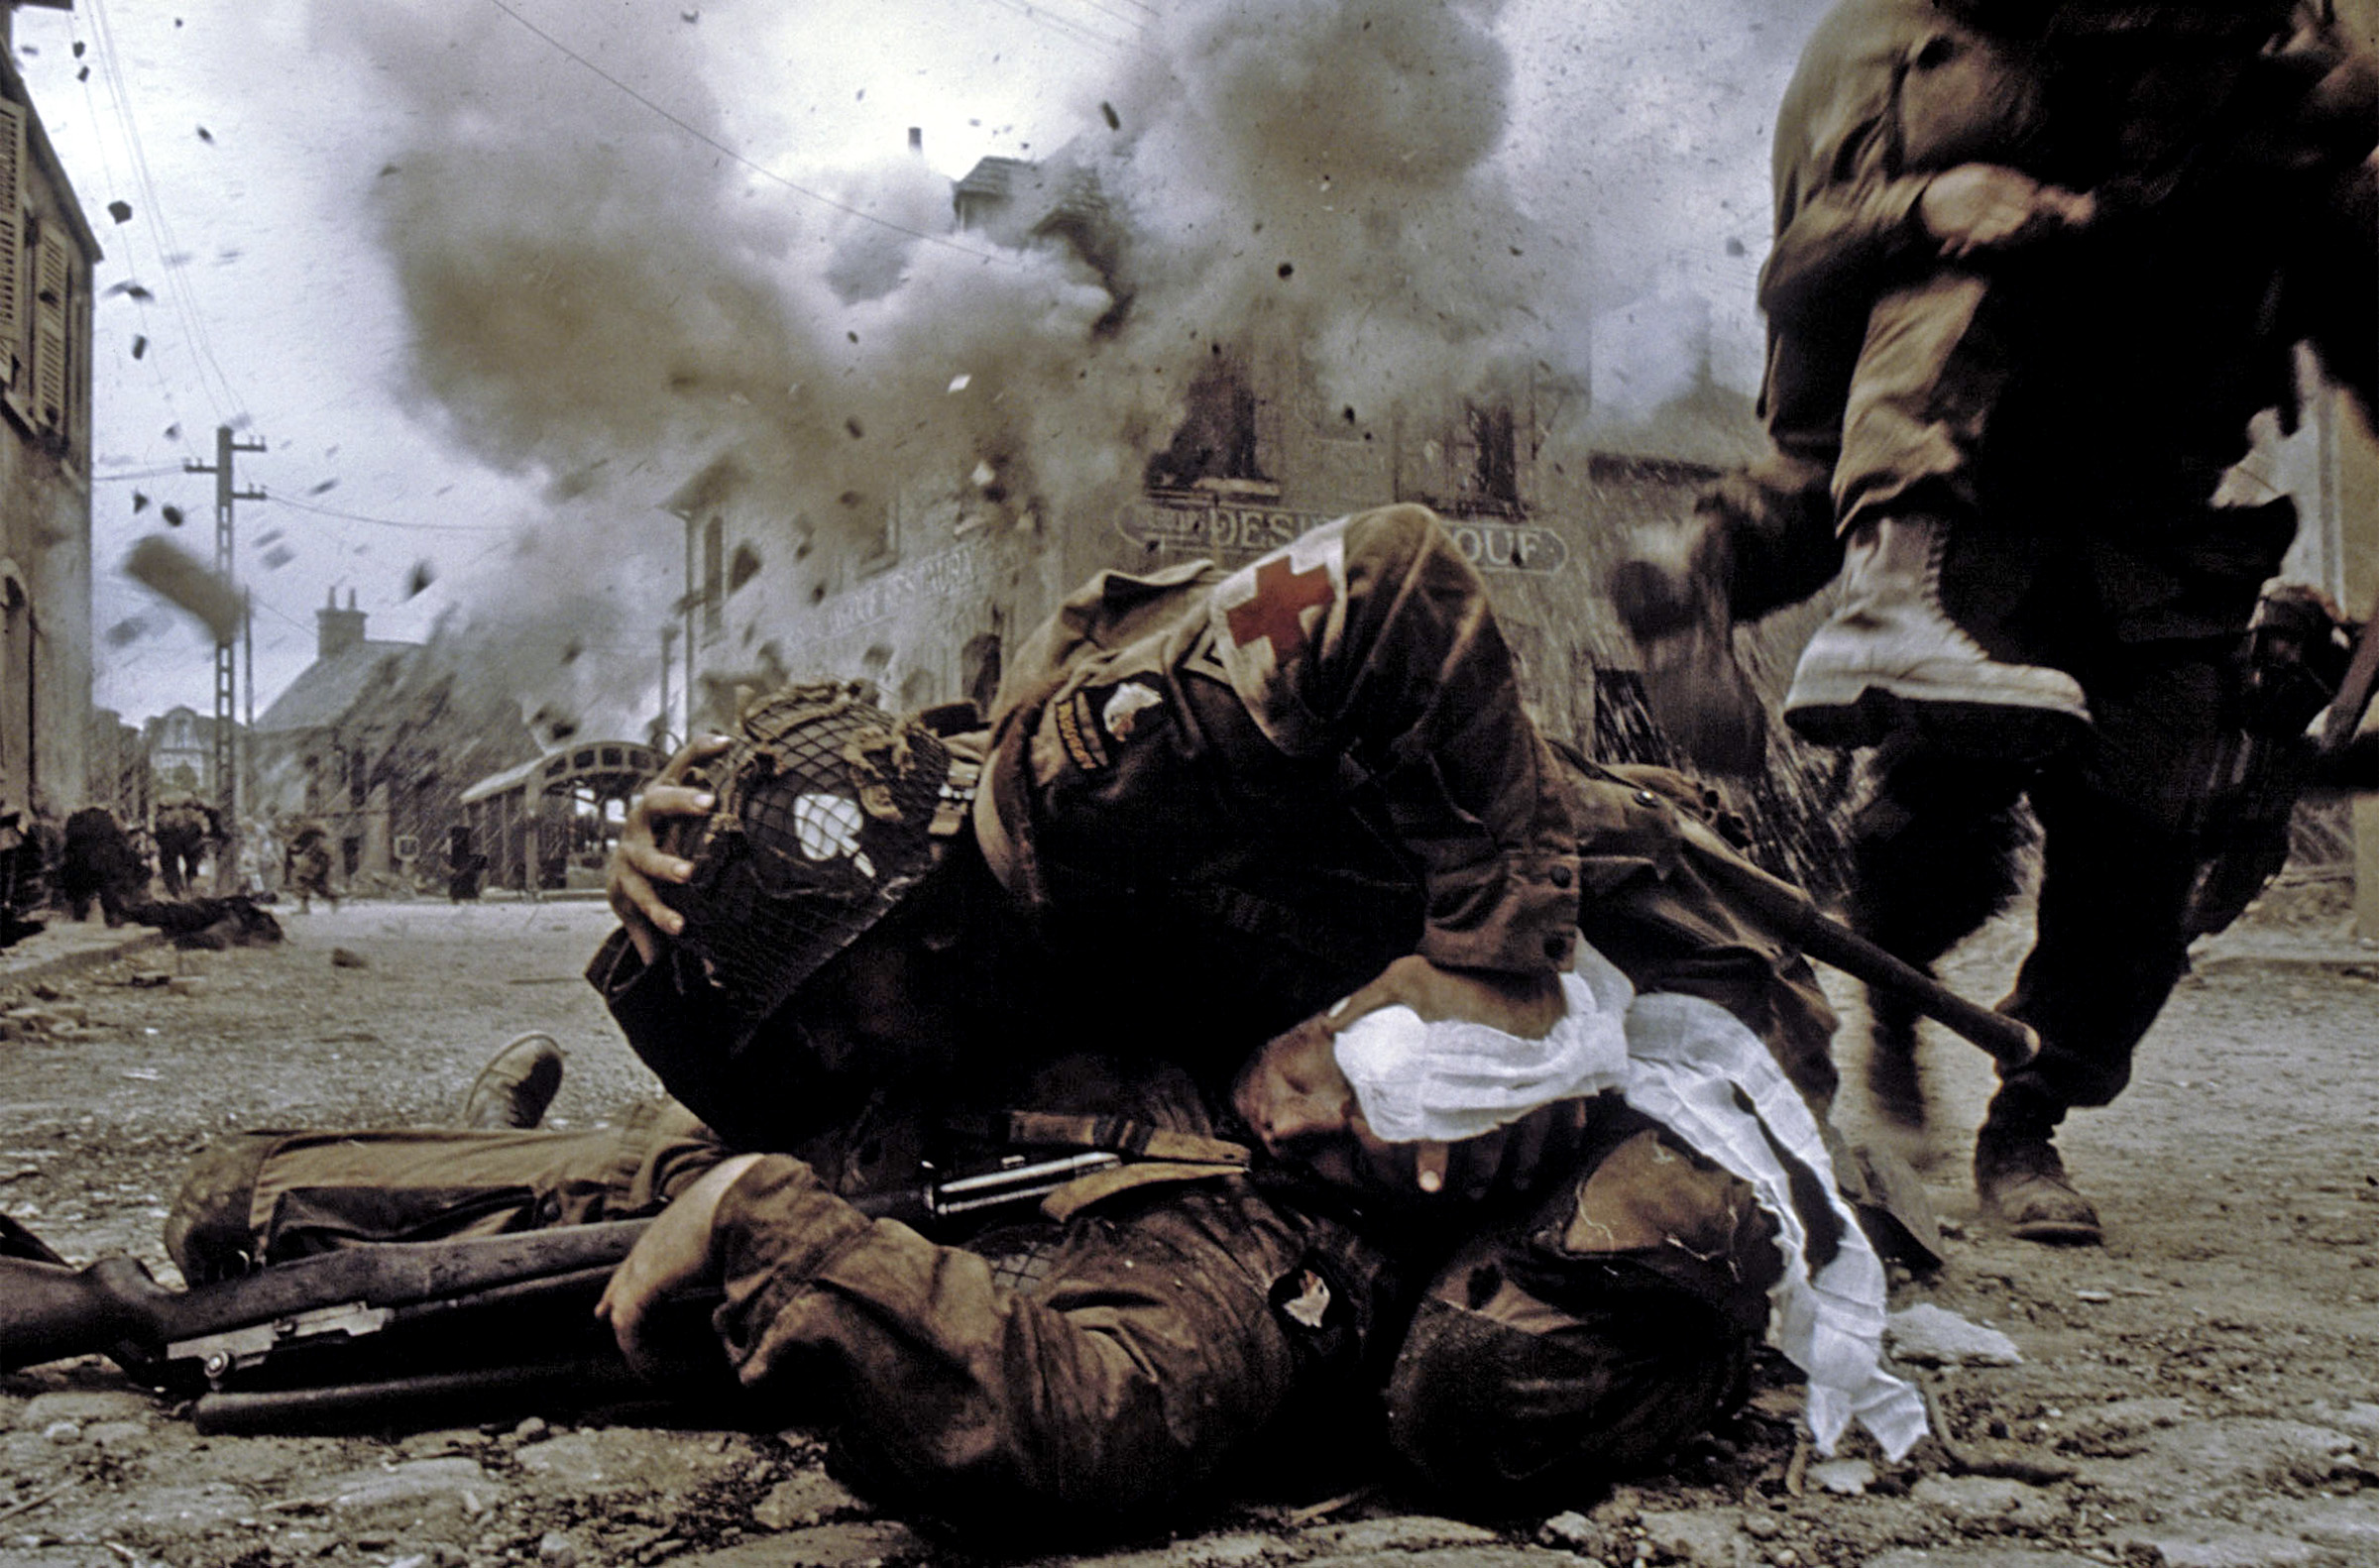 band of brothers, War, Military, Action, Drama, Hbo, Band, Brothers, Soldier, Battle Wallpaper